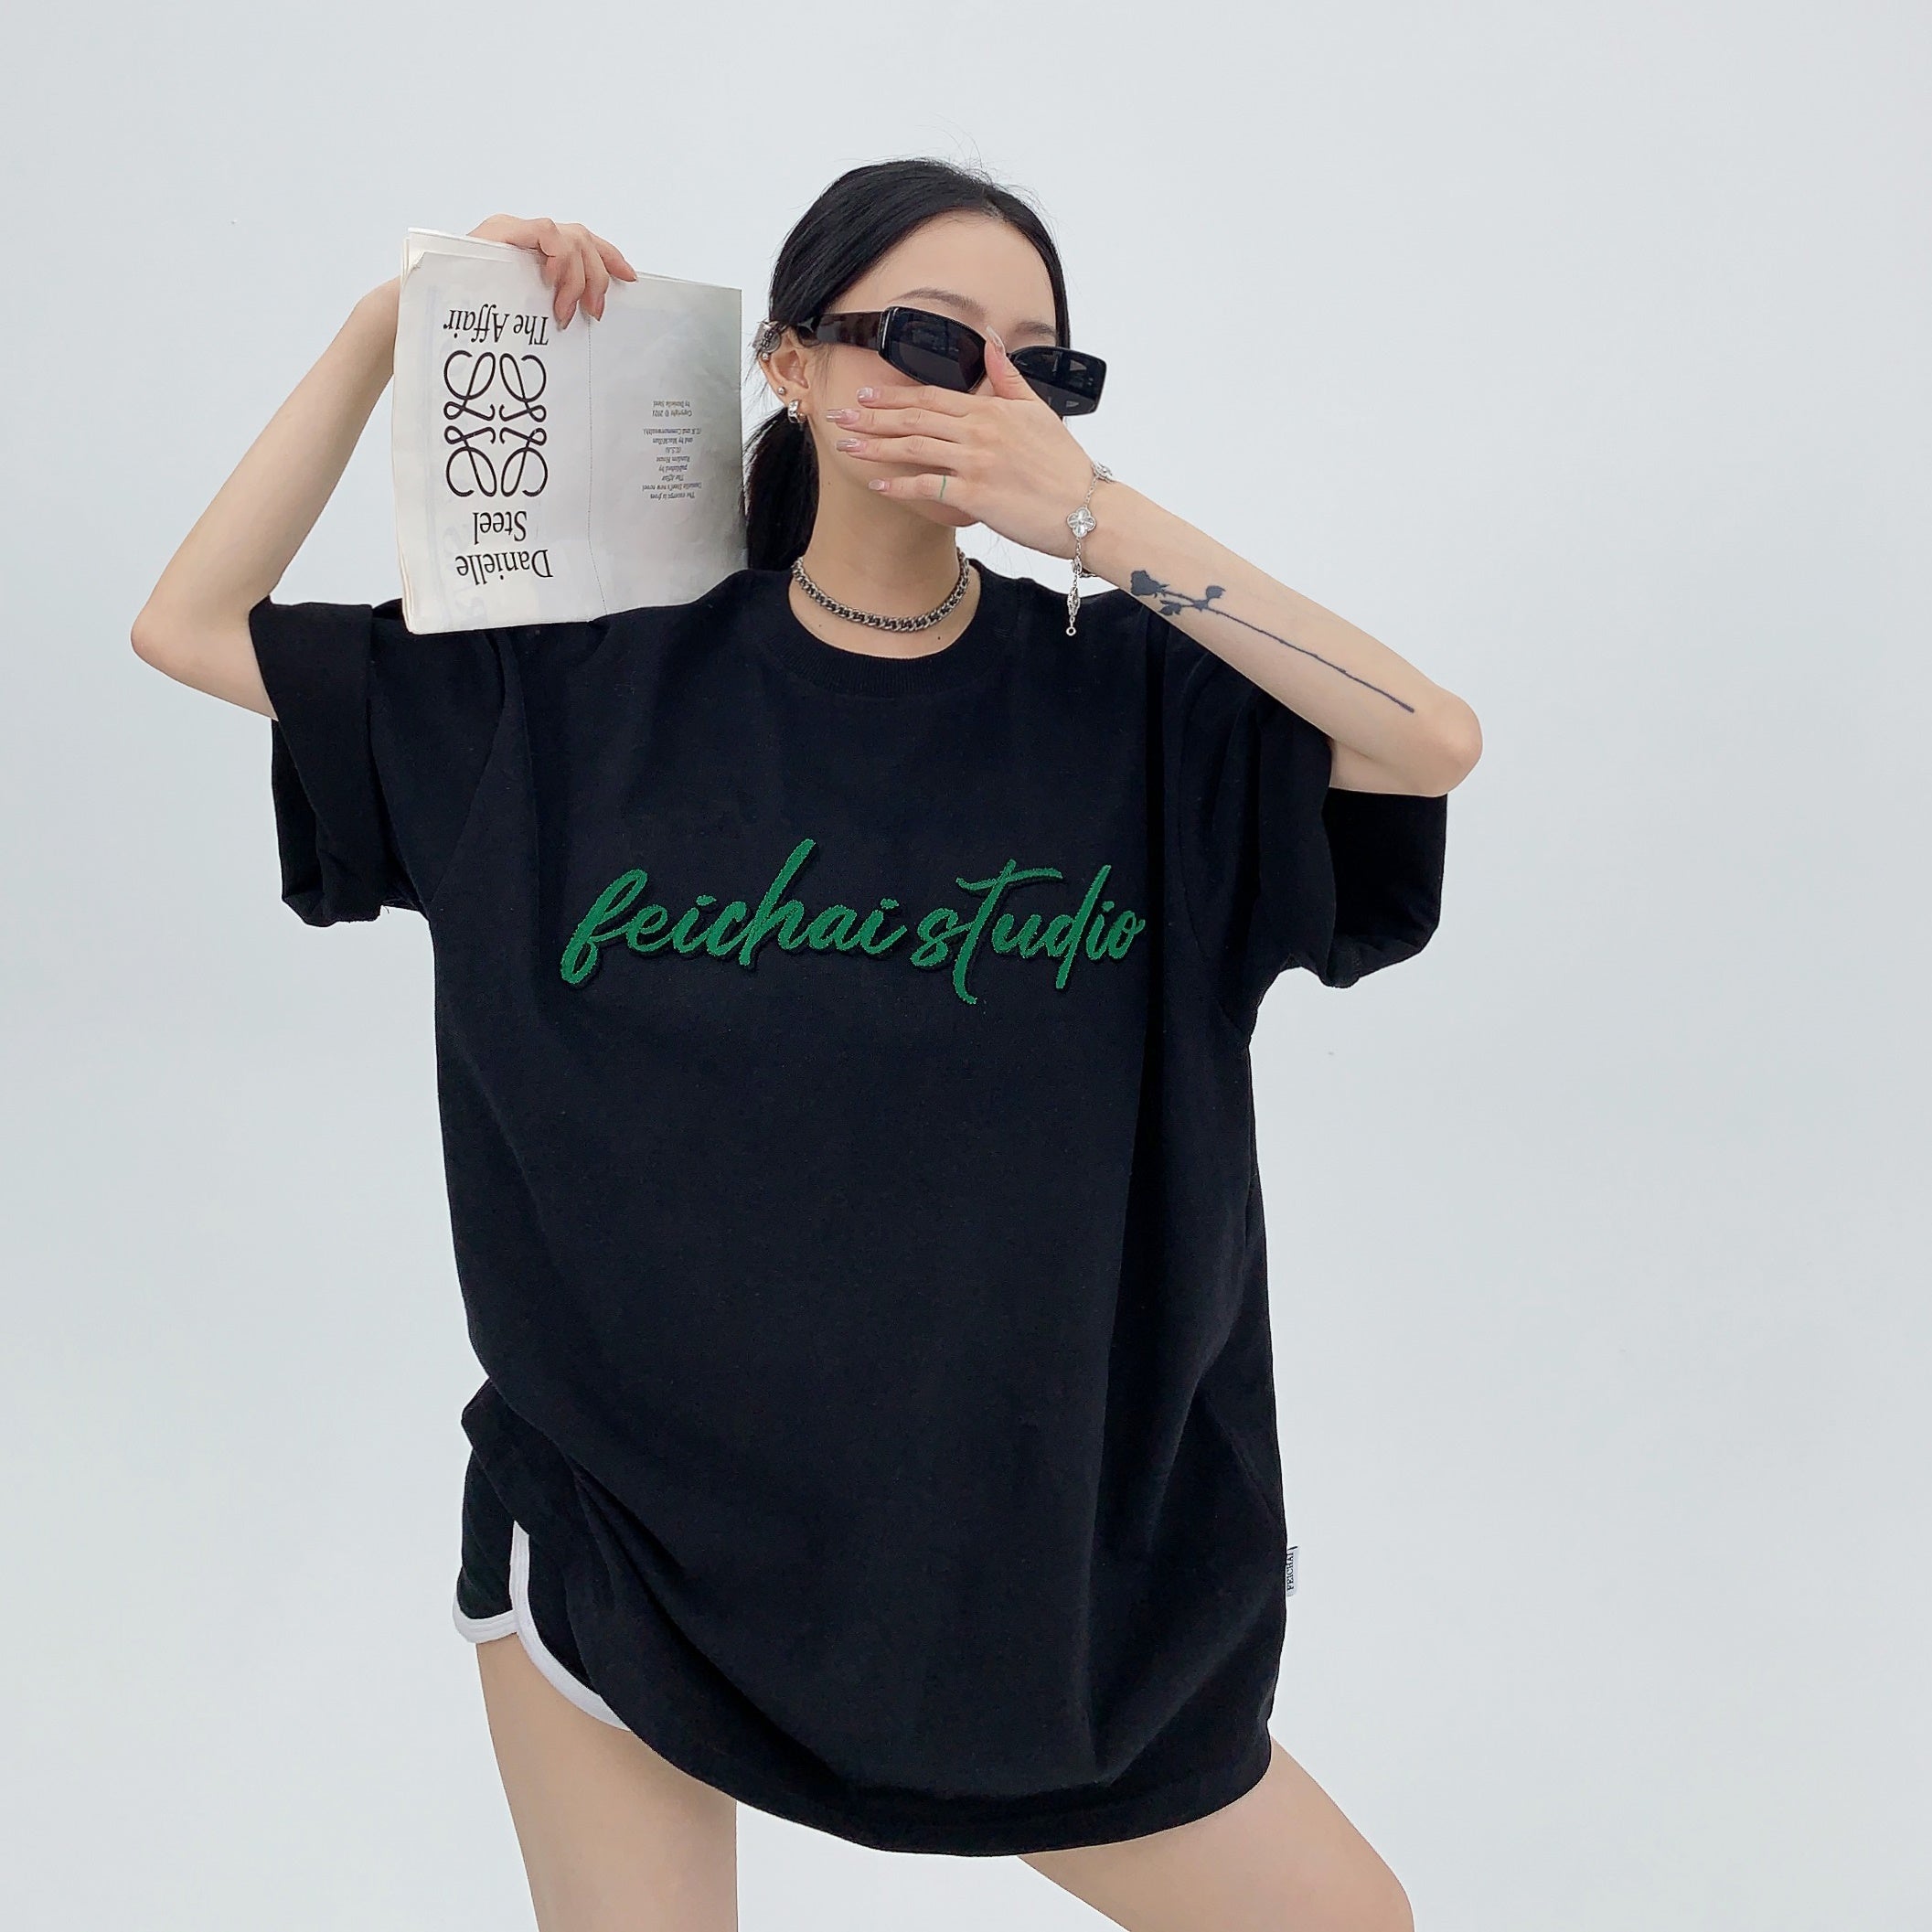 Three-dimensional Embroidered Oversize T-Shirt MW9089